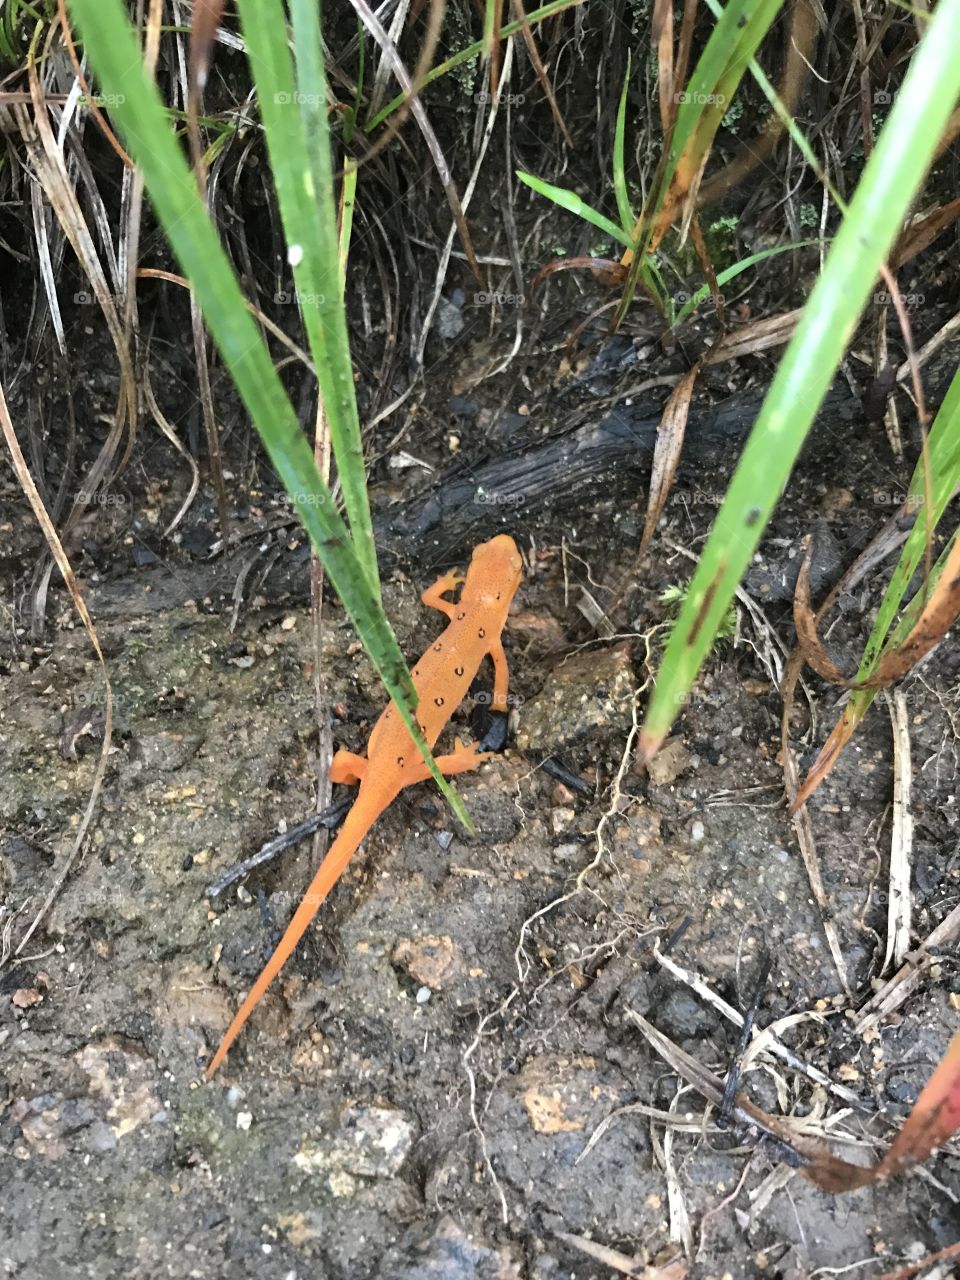 Hiking and found this lizard